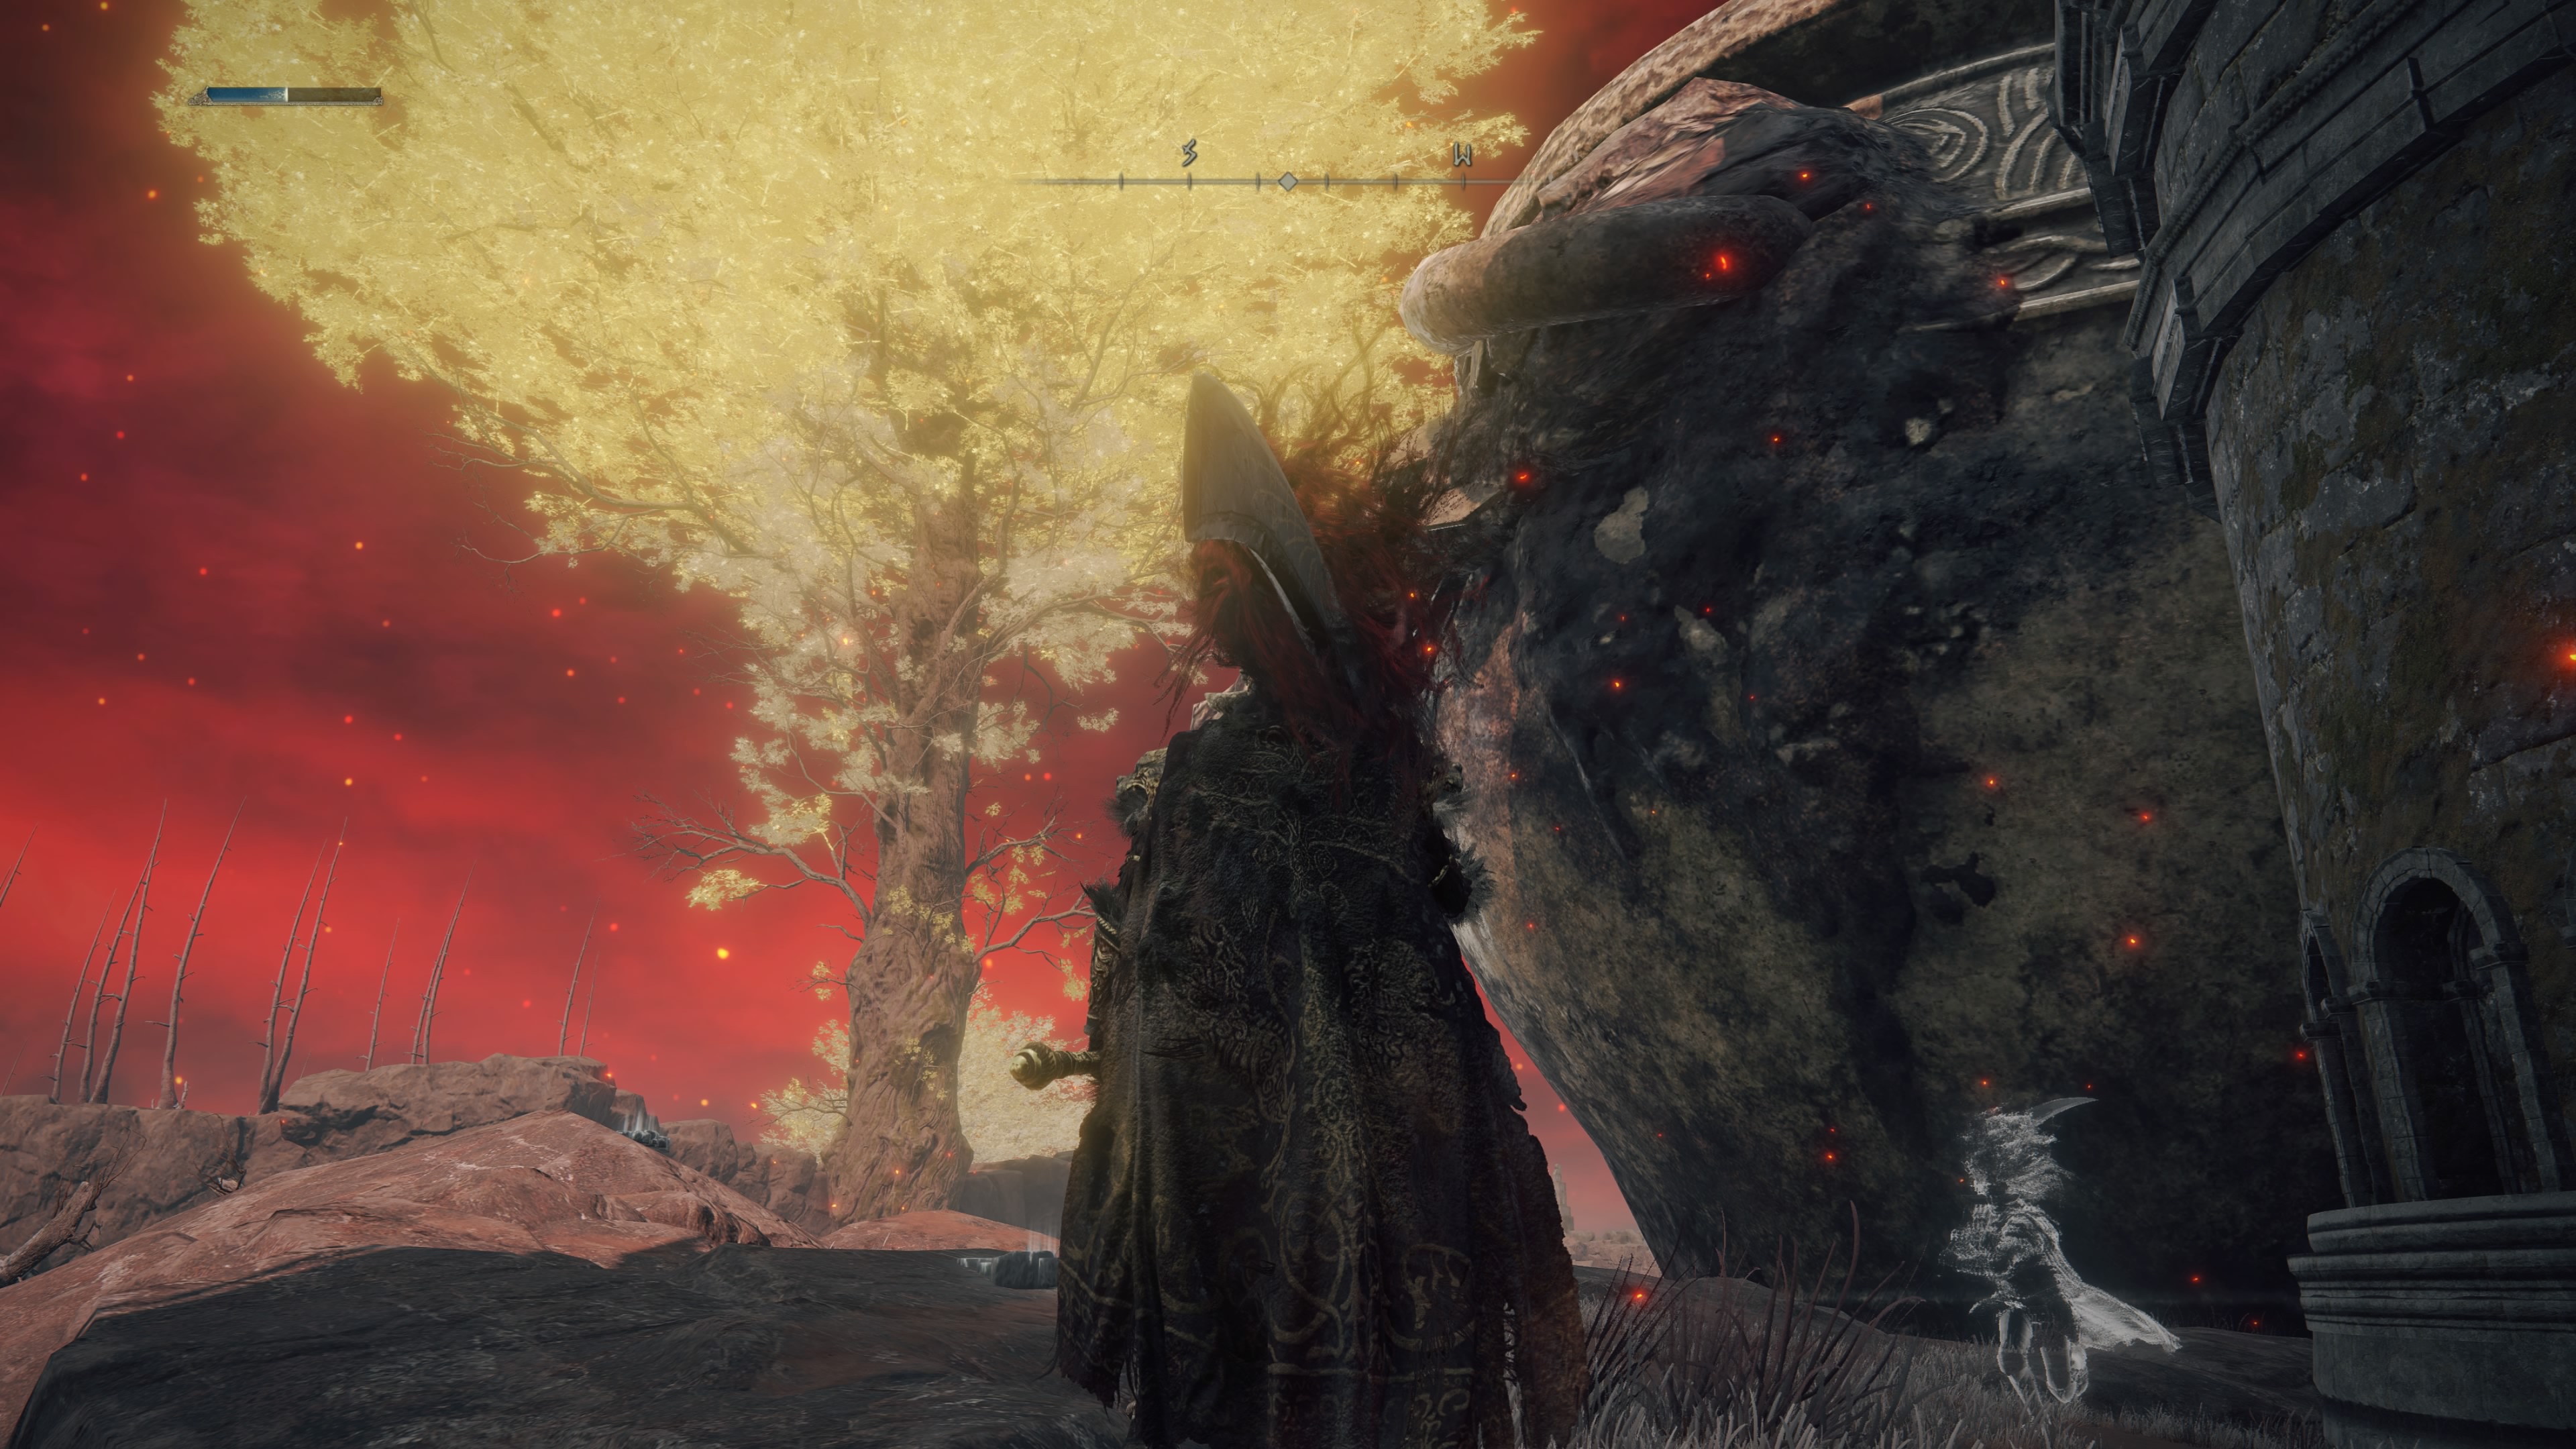 A players looks toward the Erdtree and The Great-Jar in Elden Ring